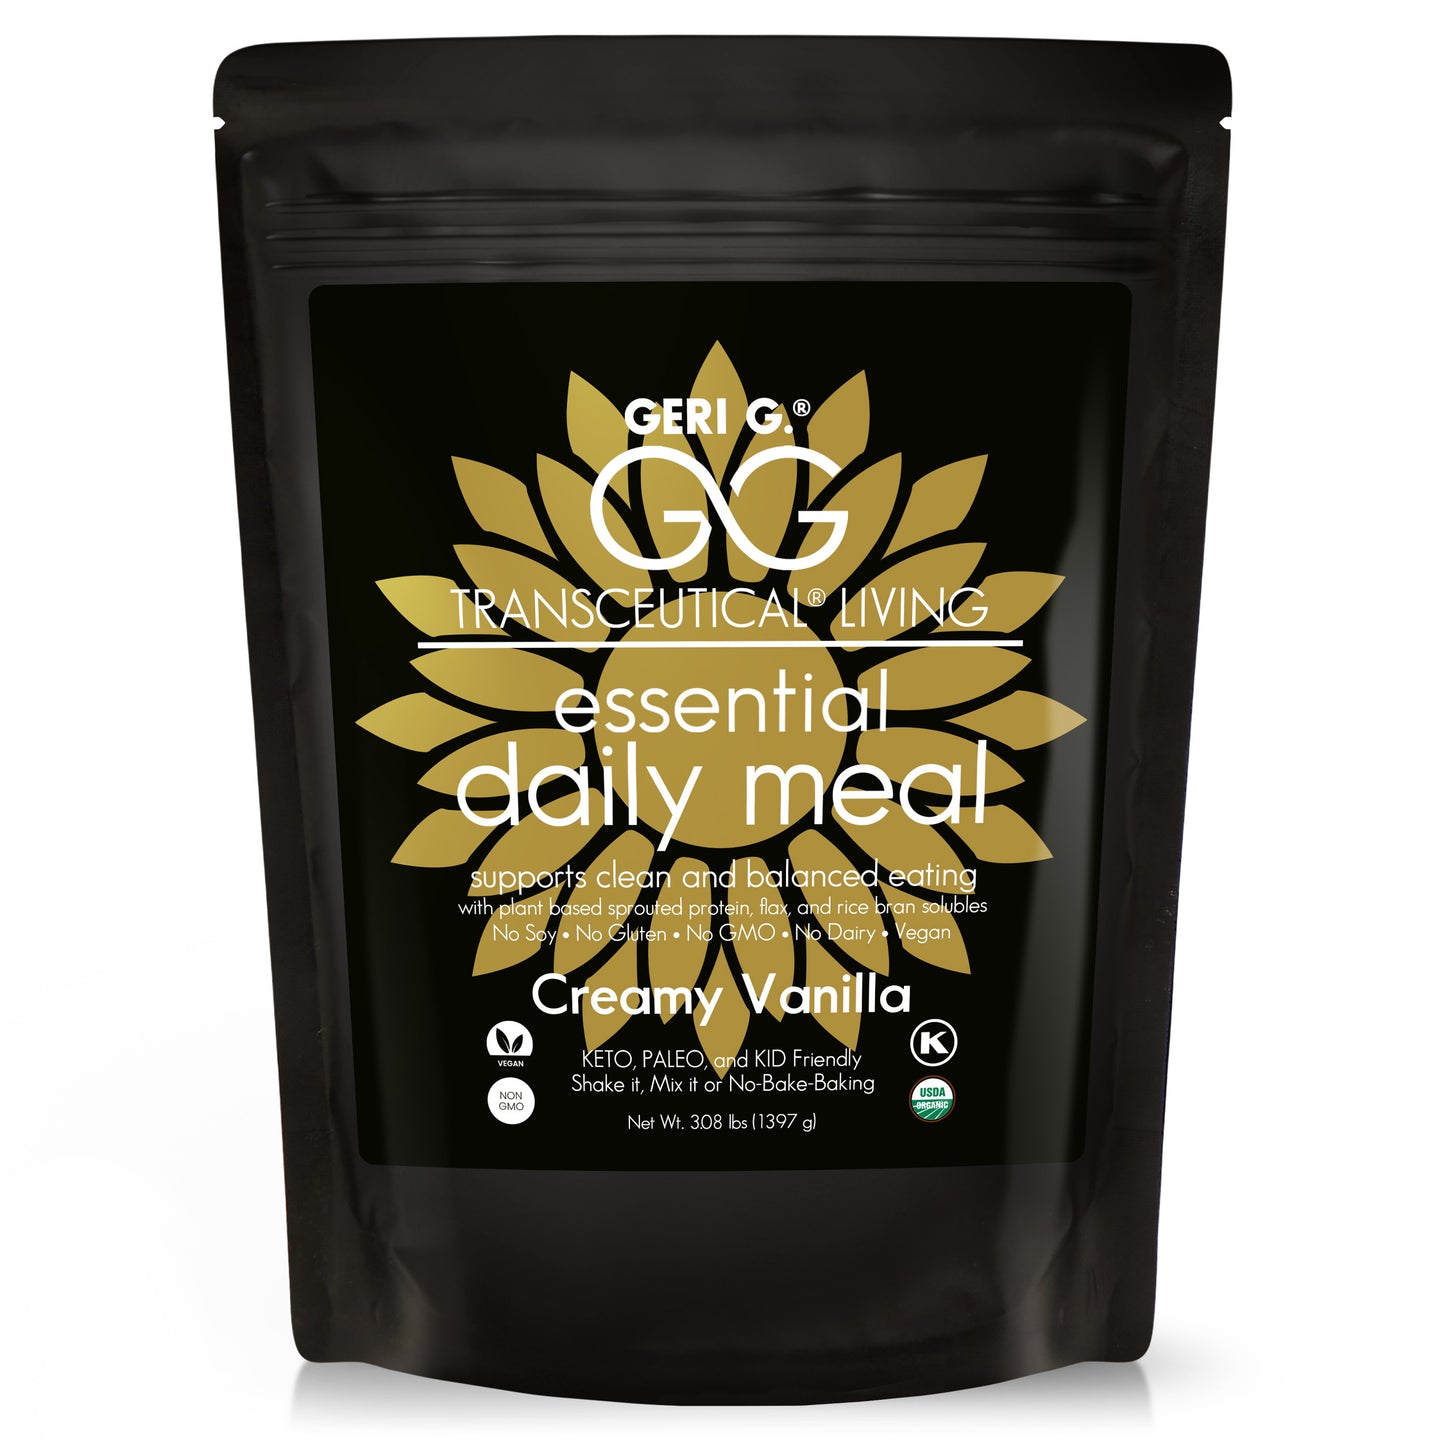 Essential Daily Meal Replacement Protein Powder - 30 day Supply